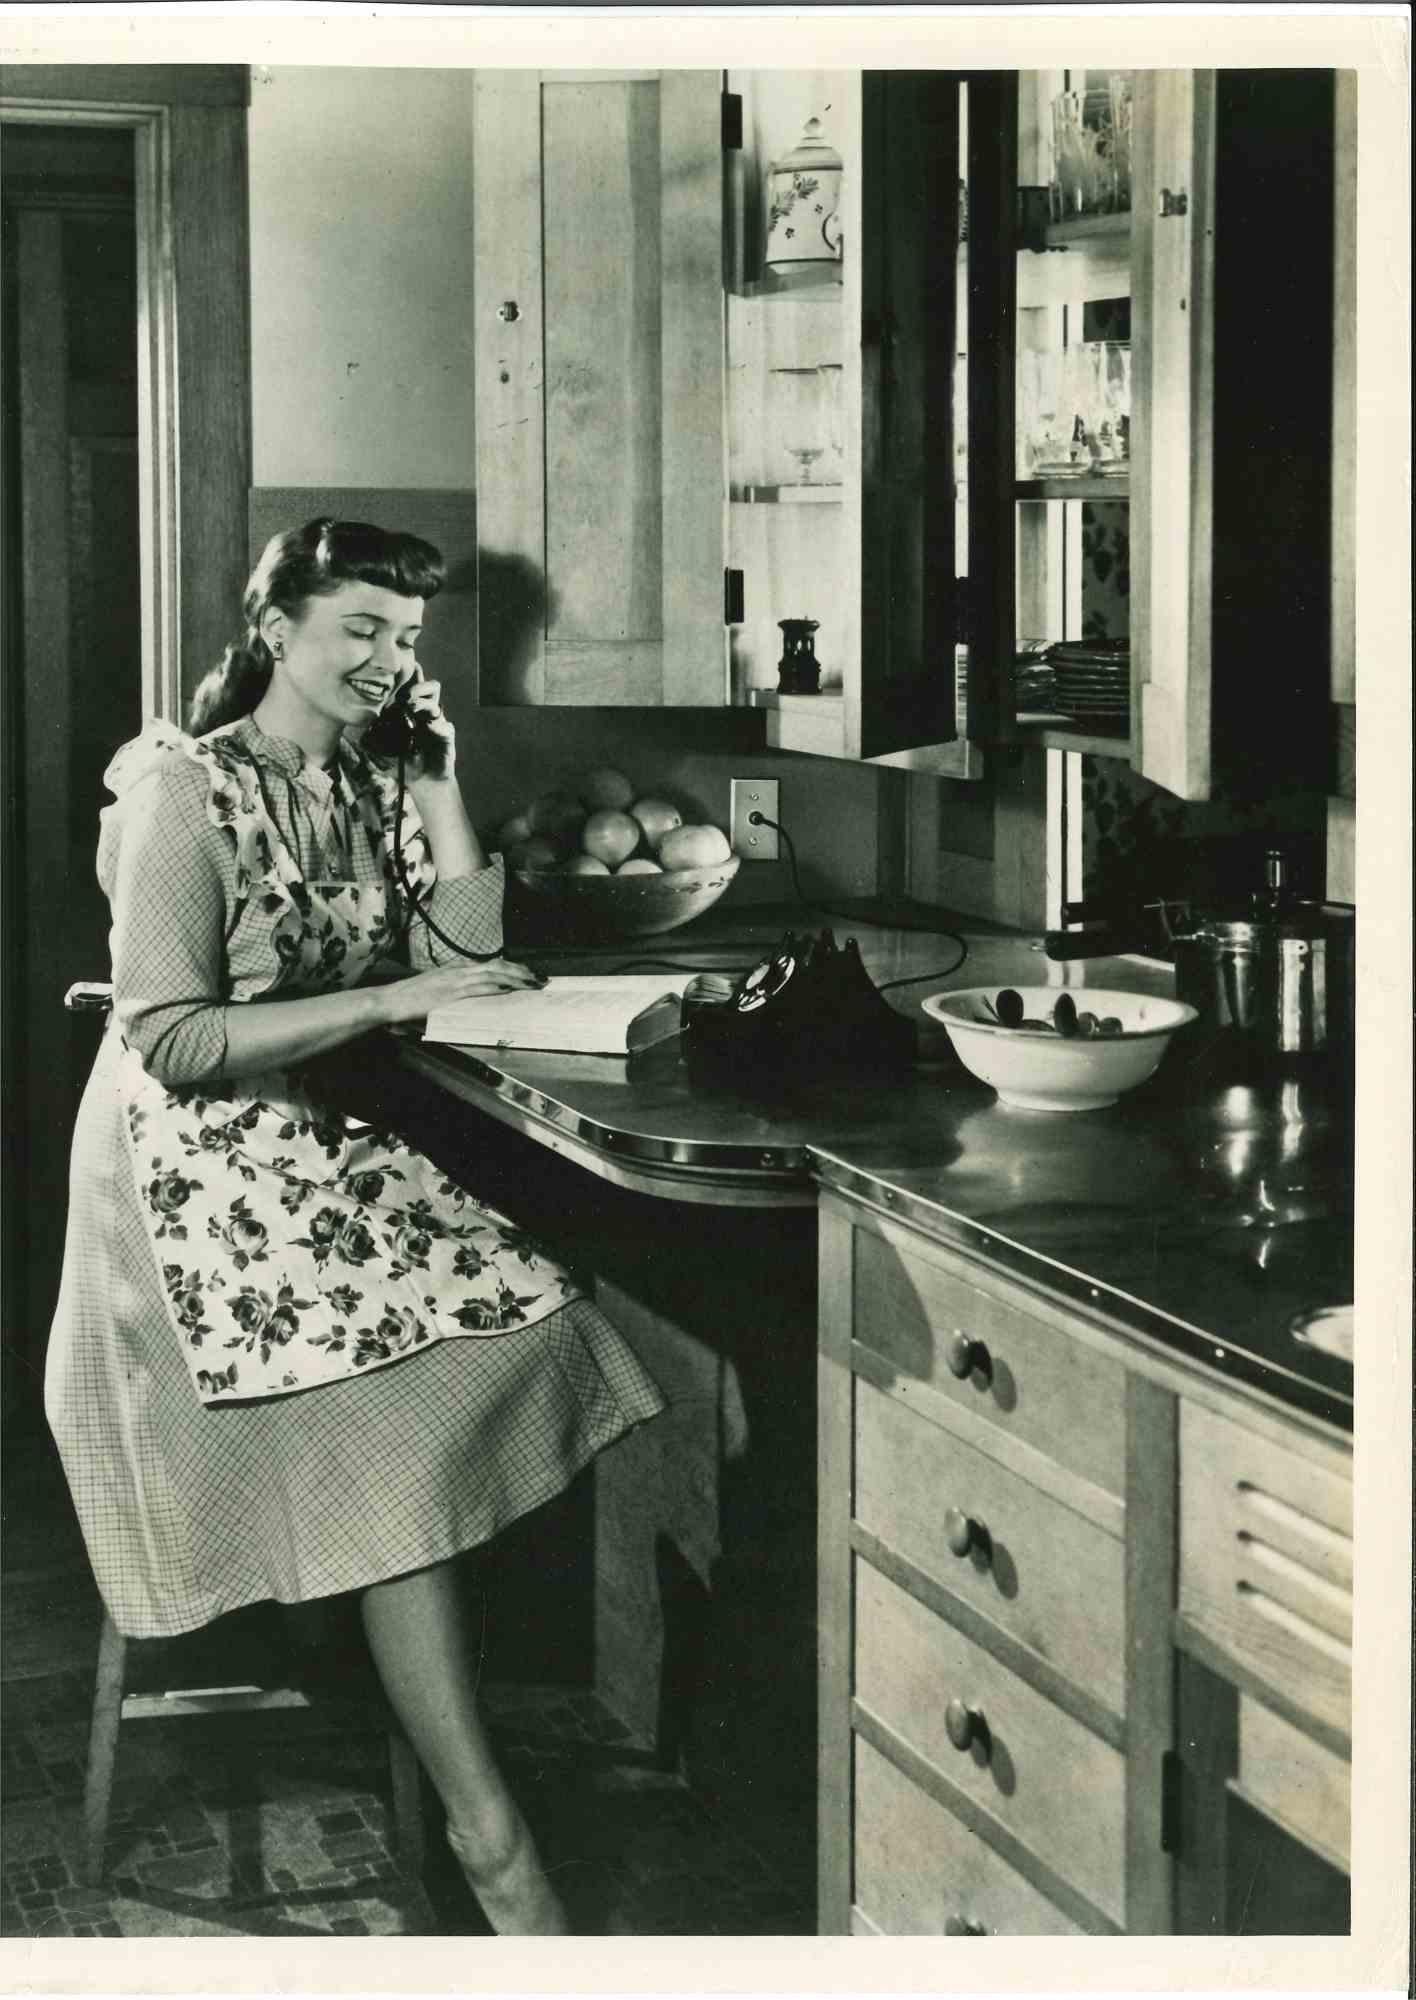 Unknown Figurative Photograph - Telephone System - American Vintage Photograph - Mid 20th Century